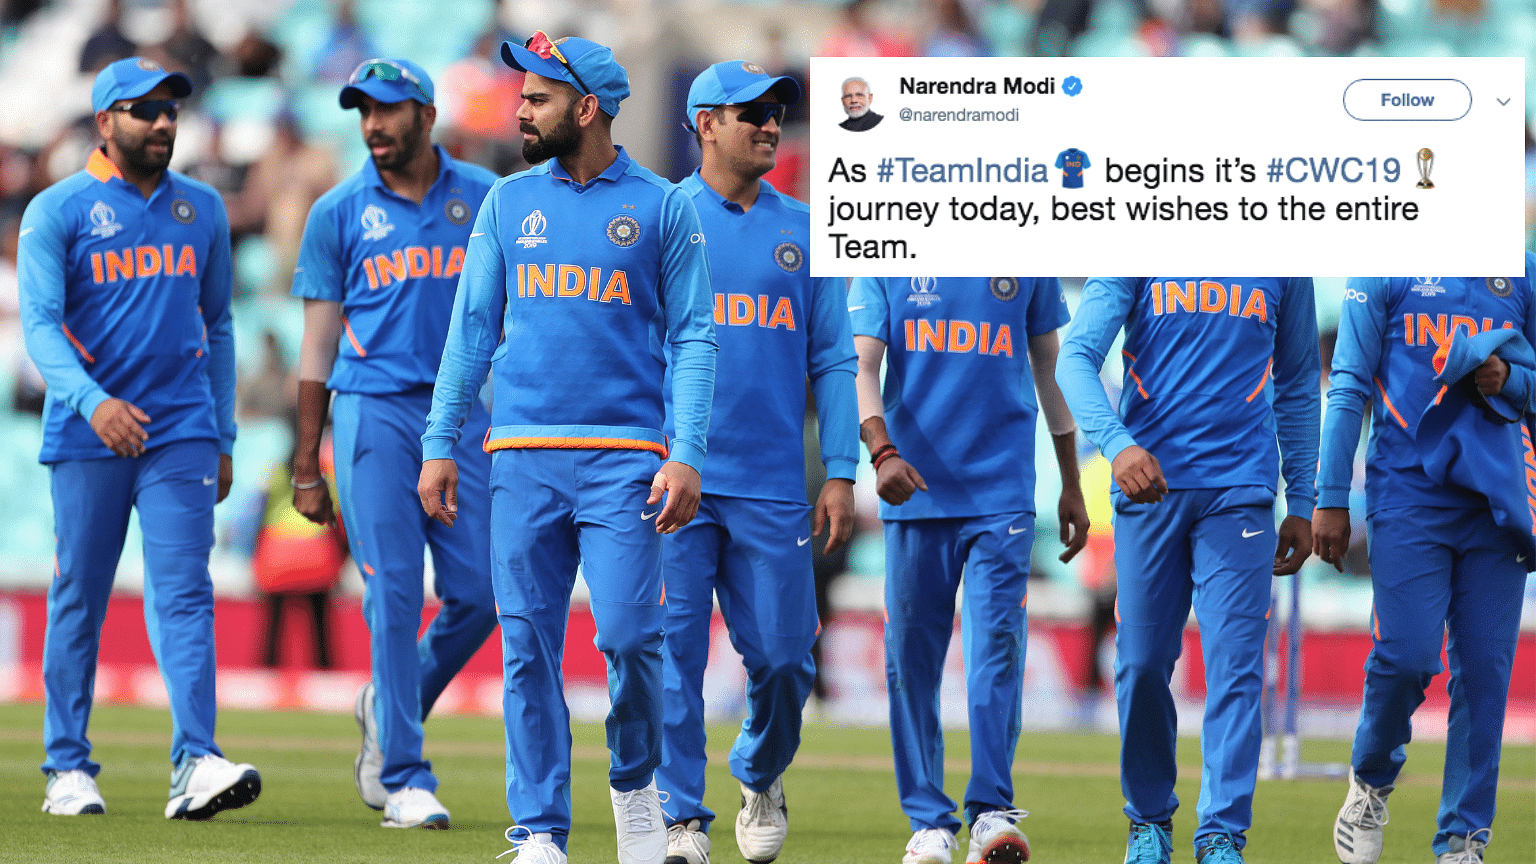 Prime Minister Narendra Modi wished the Indian cricket team as they began their ICC World Cup campaign.